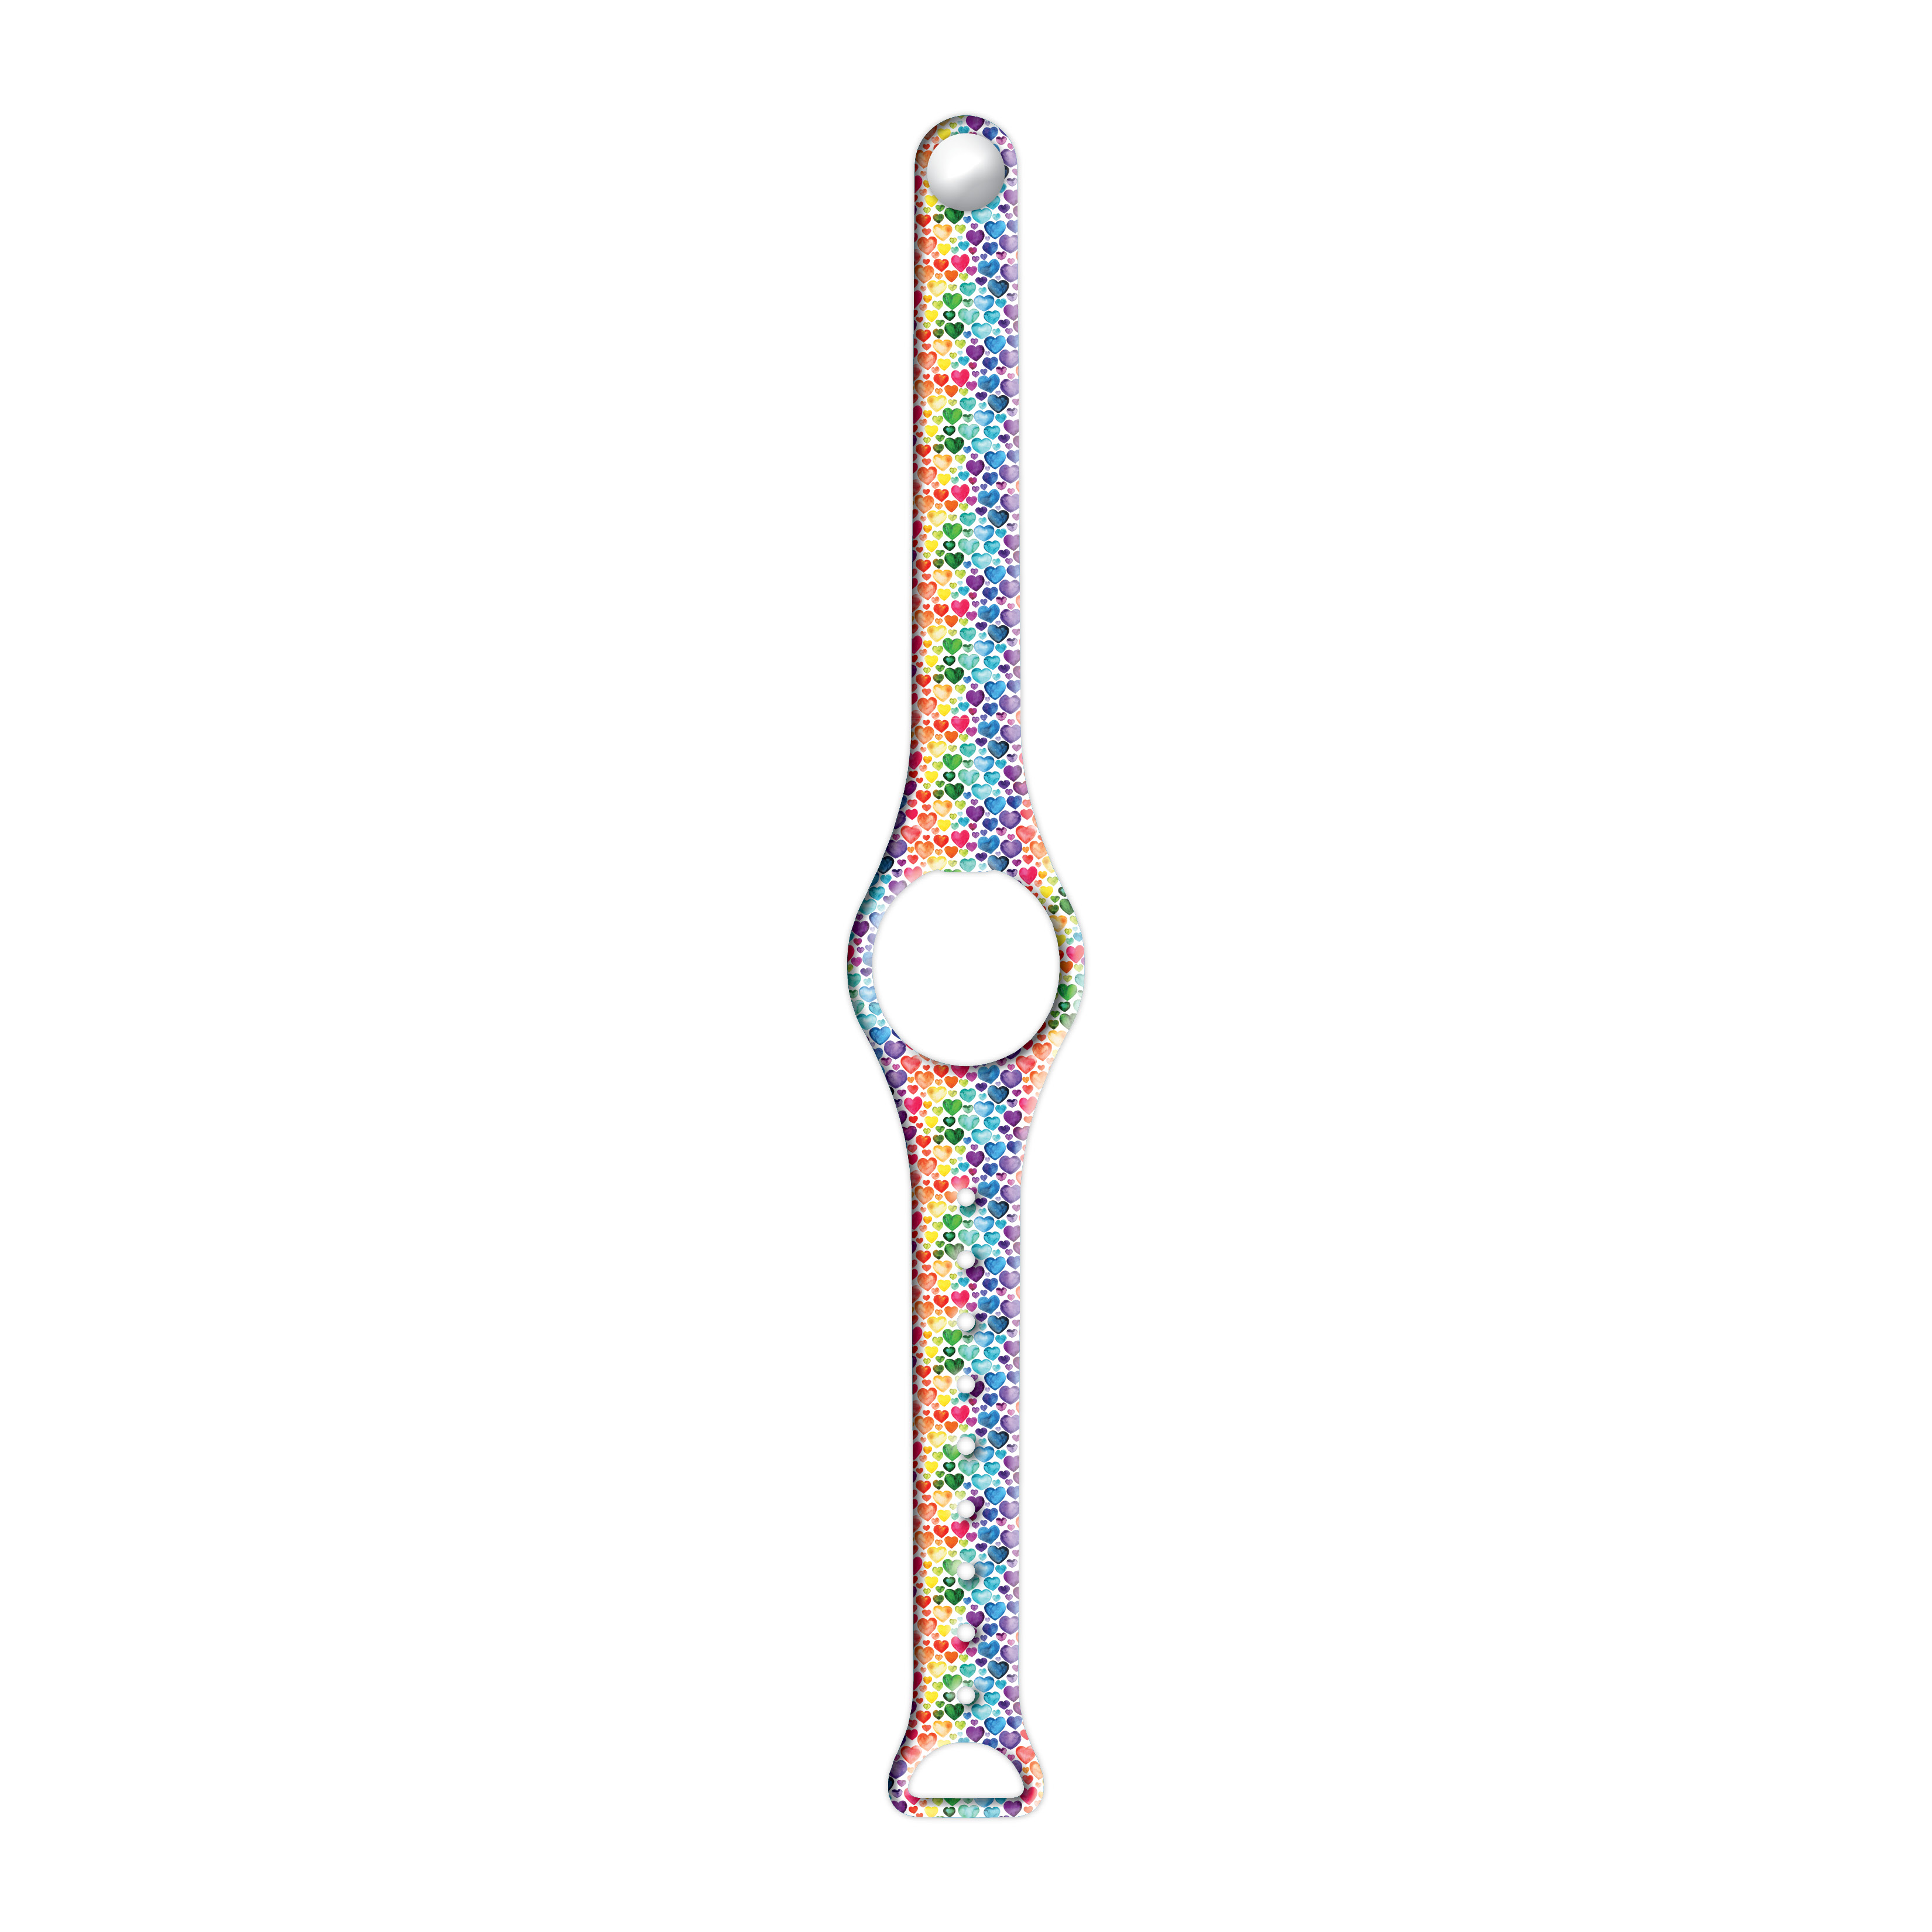 Rainbow Hearts - Watchitude Move 2 | Blip Watch Band (Band Only) 